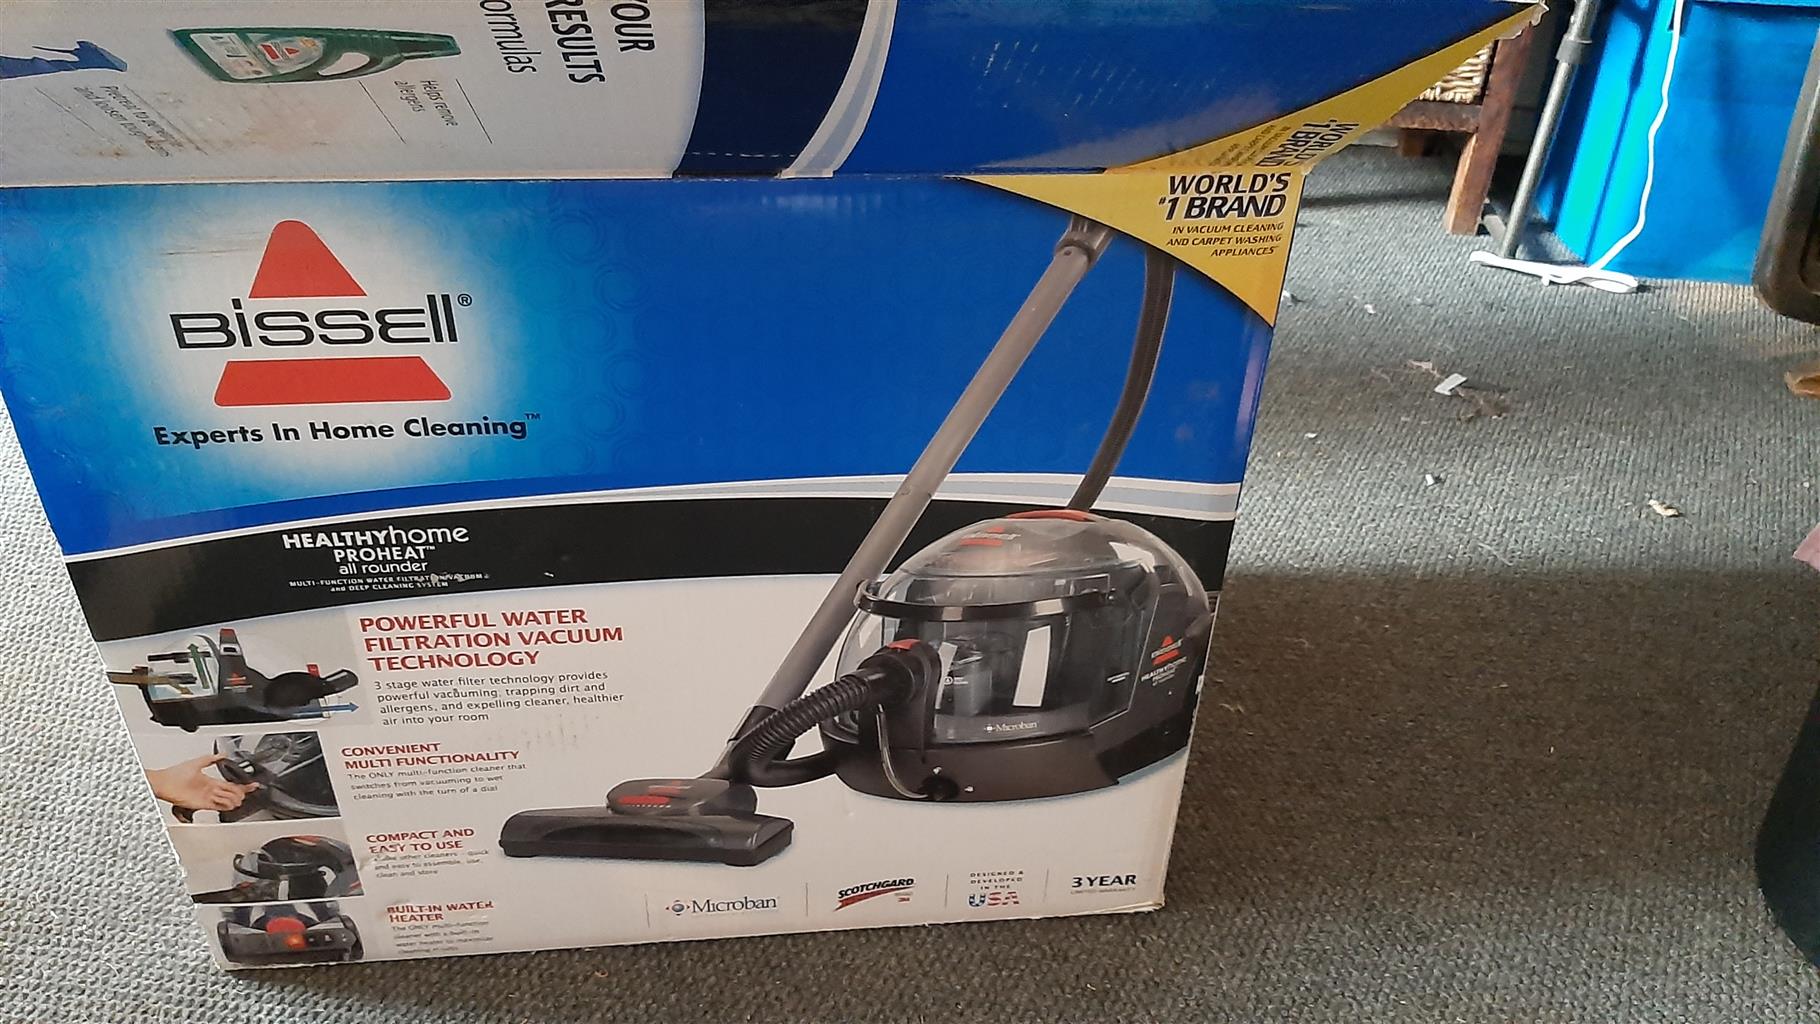 Bissell carpet washer and facuum cleaner 